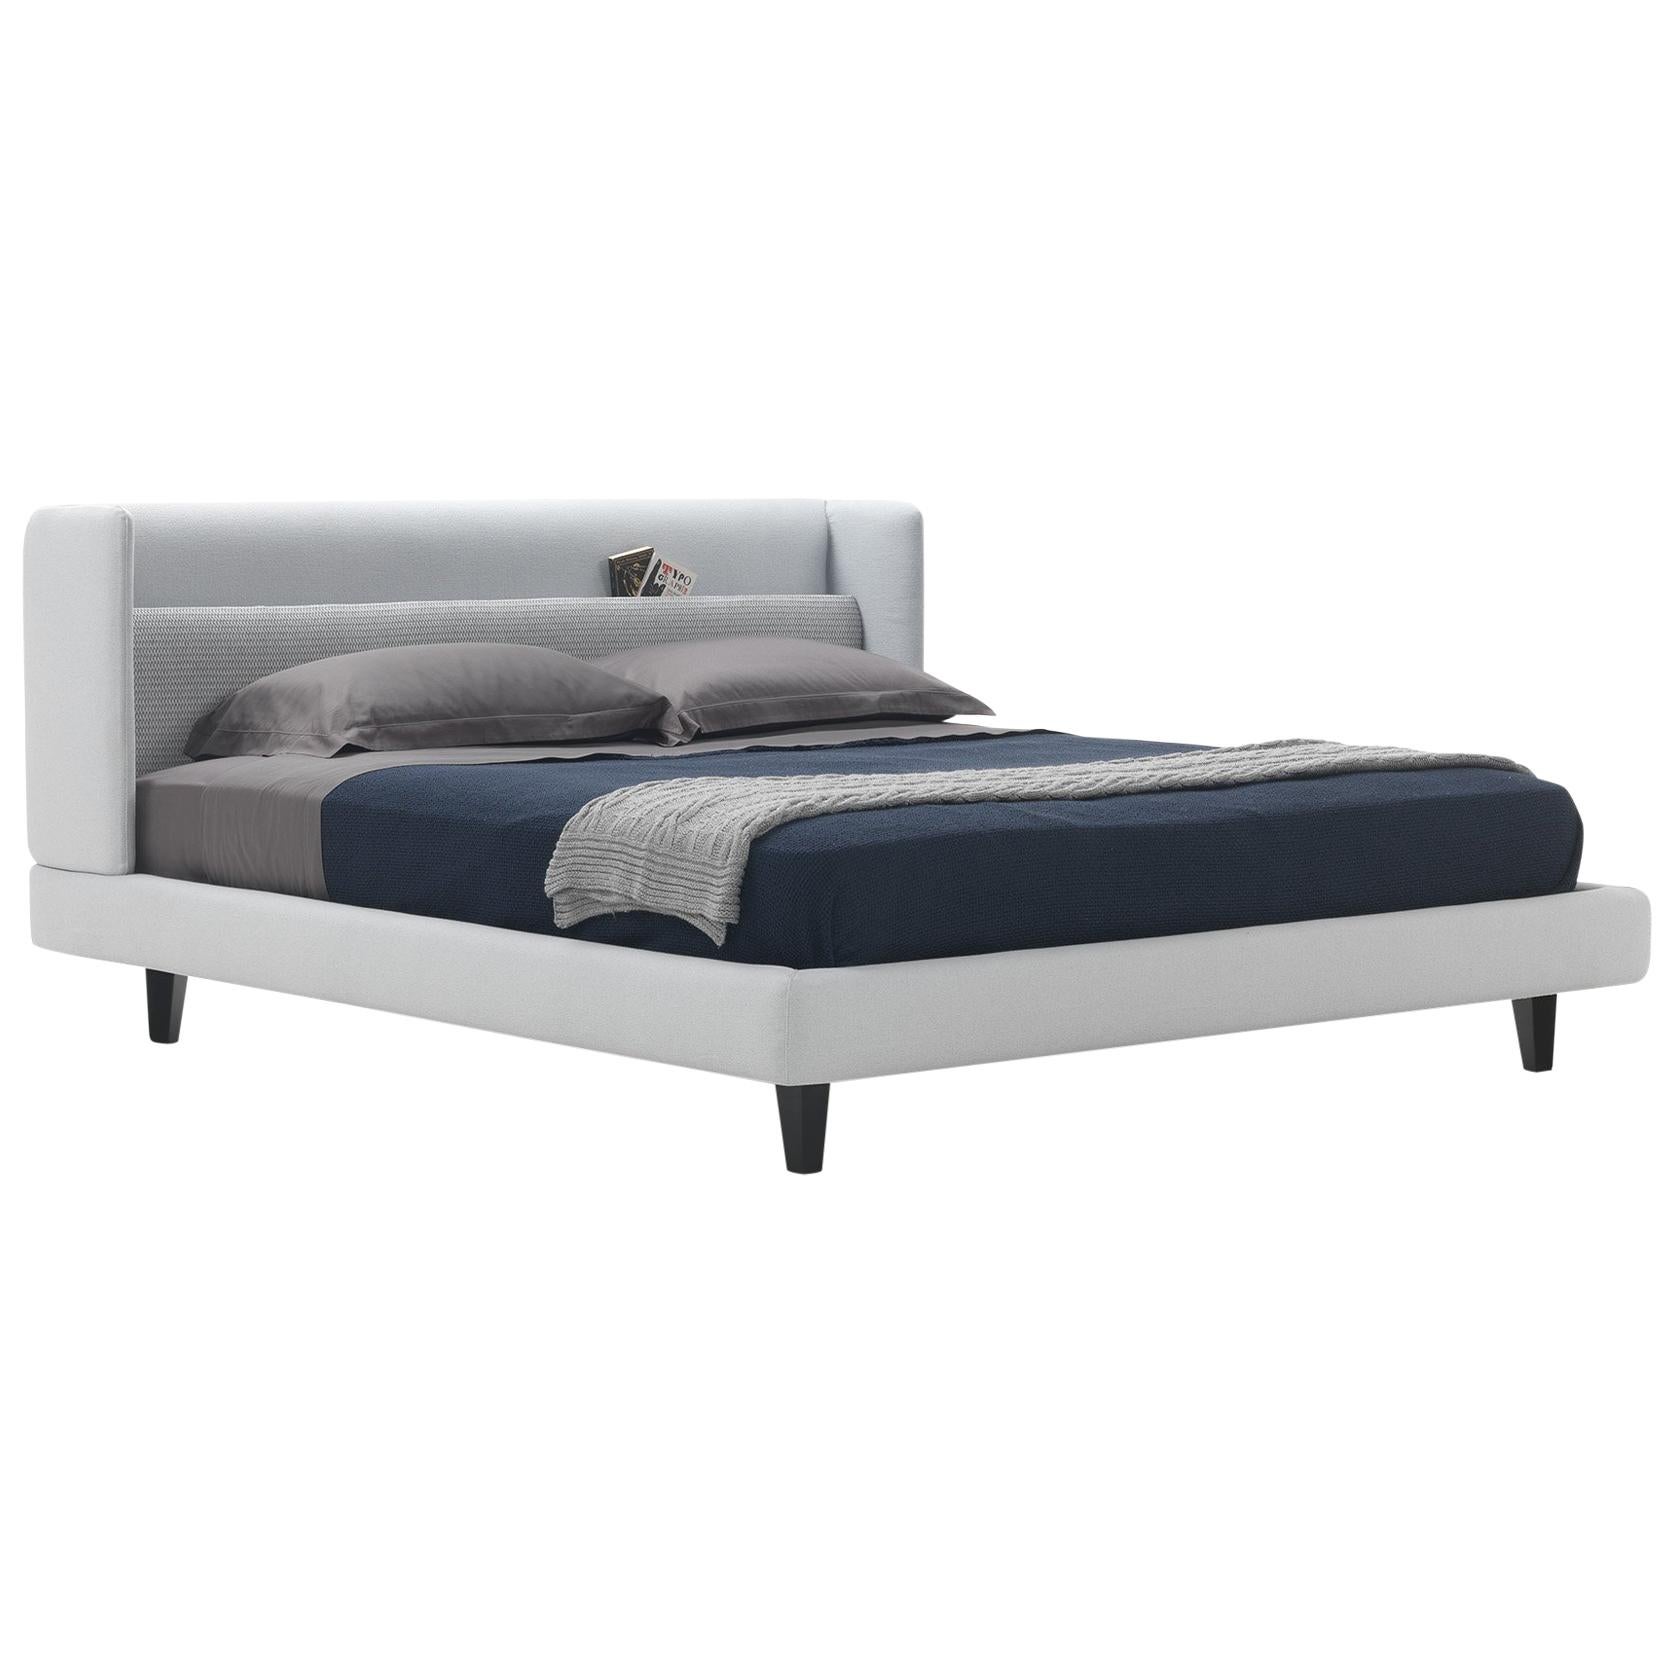 'KNIGHT' King-Size Bed in Light Grey with Functional Headboard For Sale